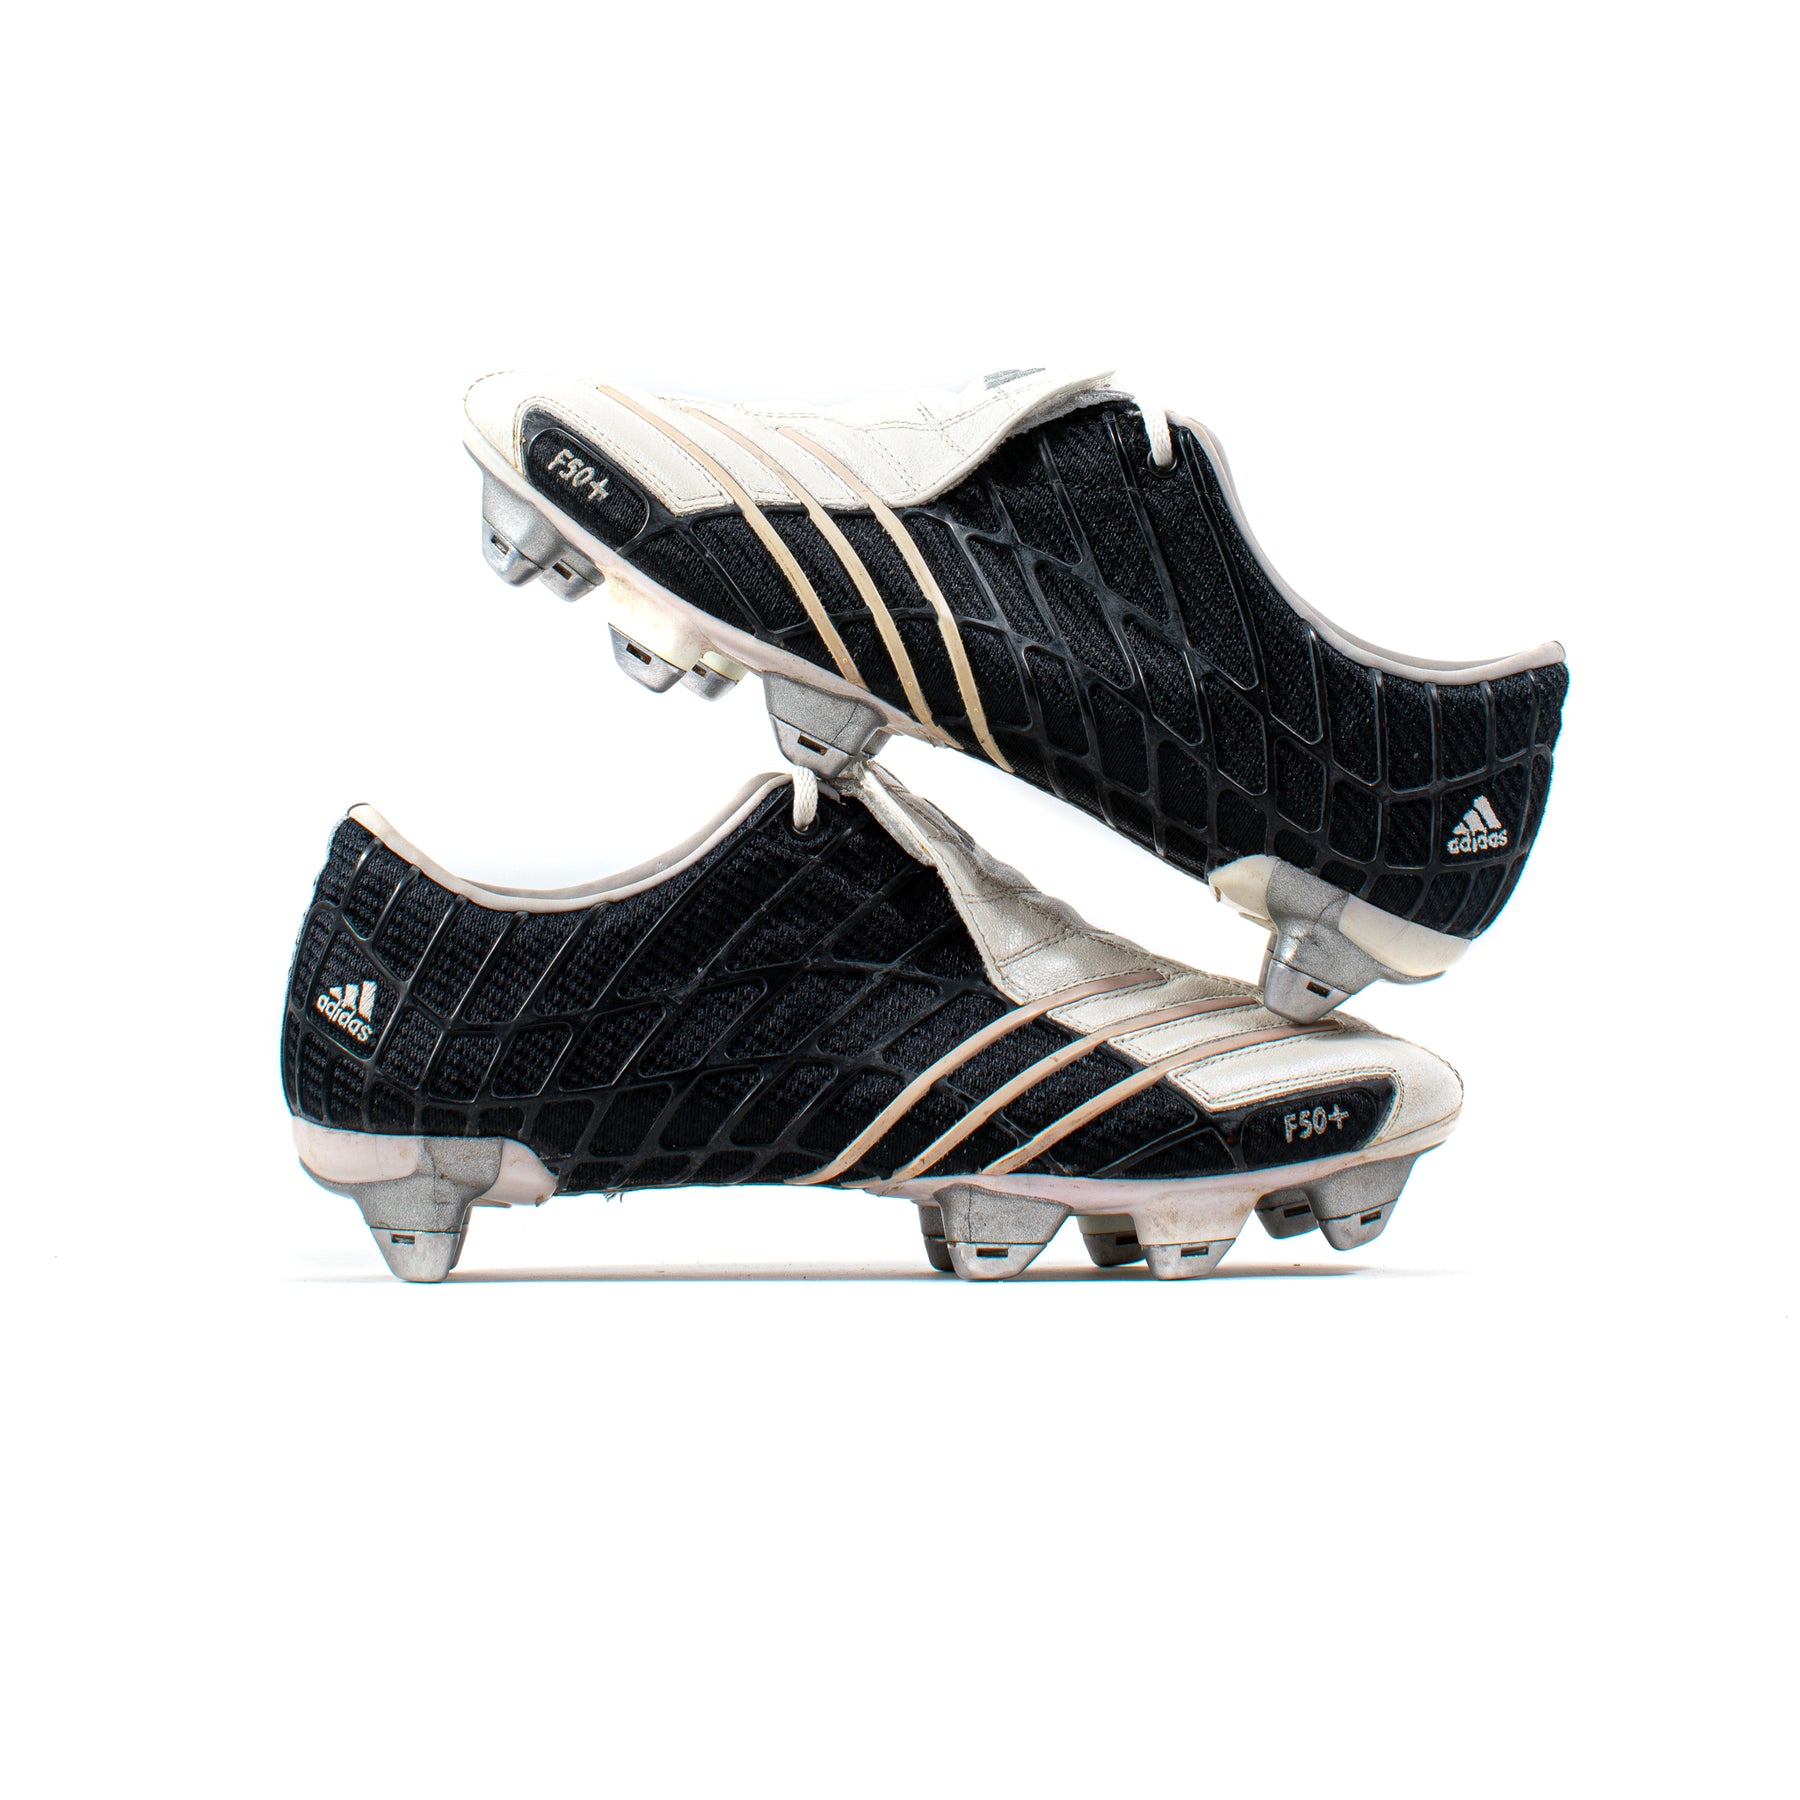 Adidas F50+ TRX Spider White Black SG – Classic Soccer Cleats